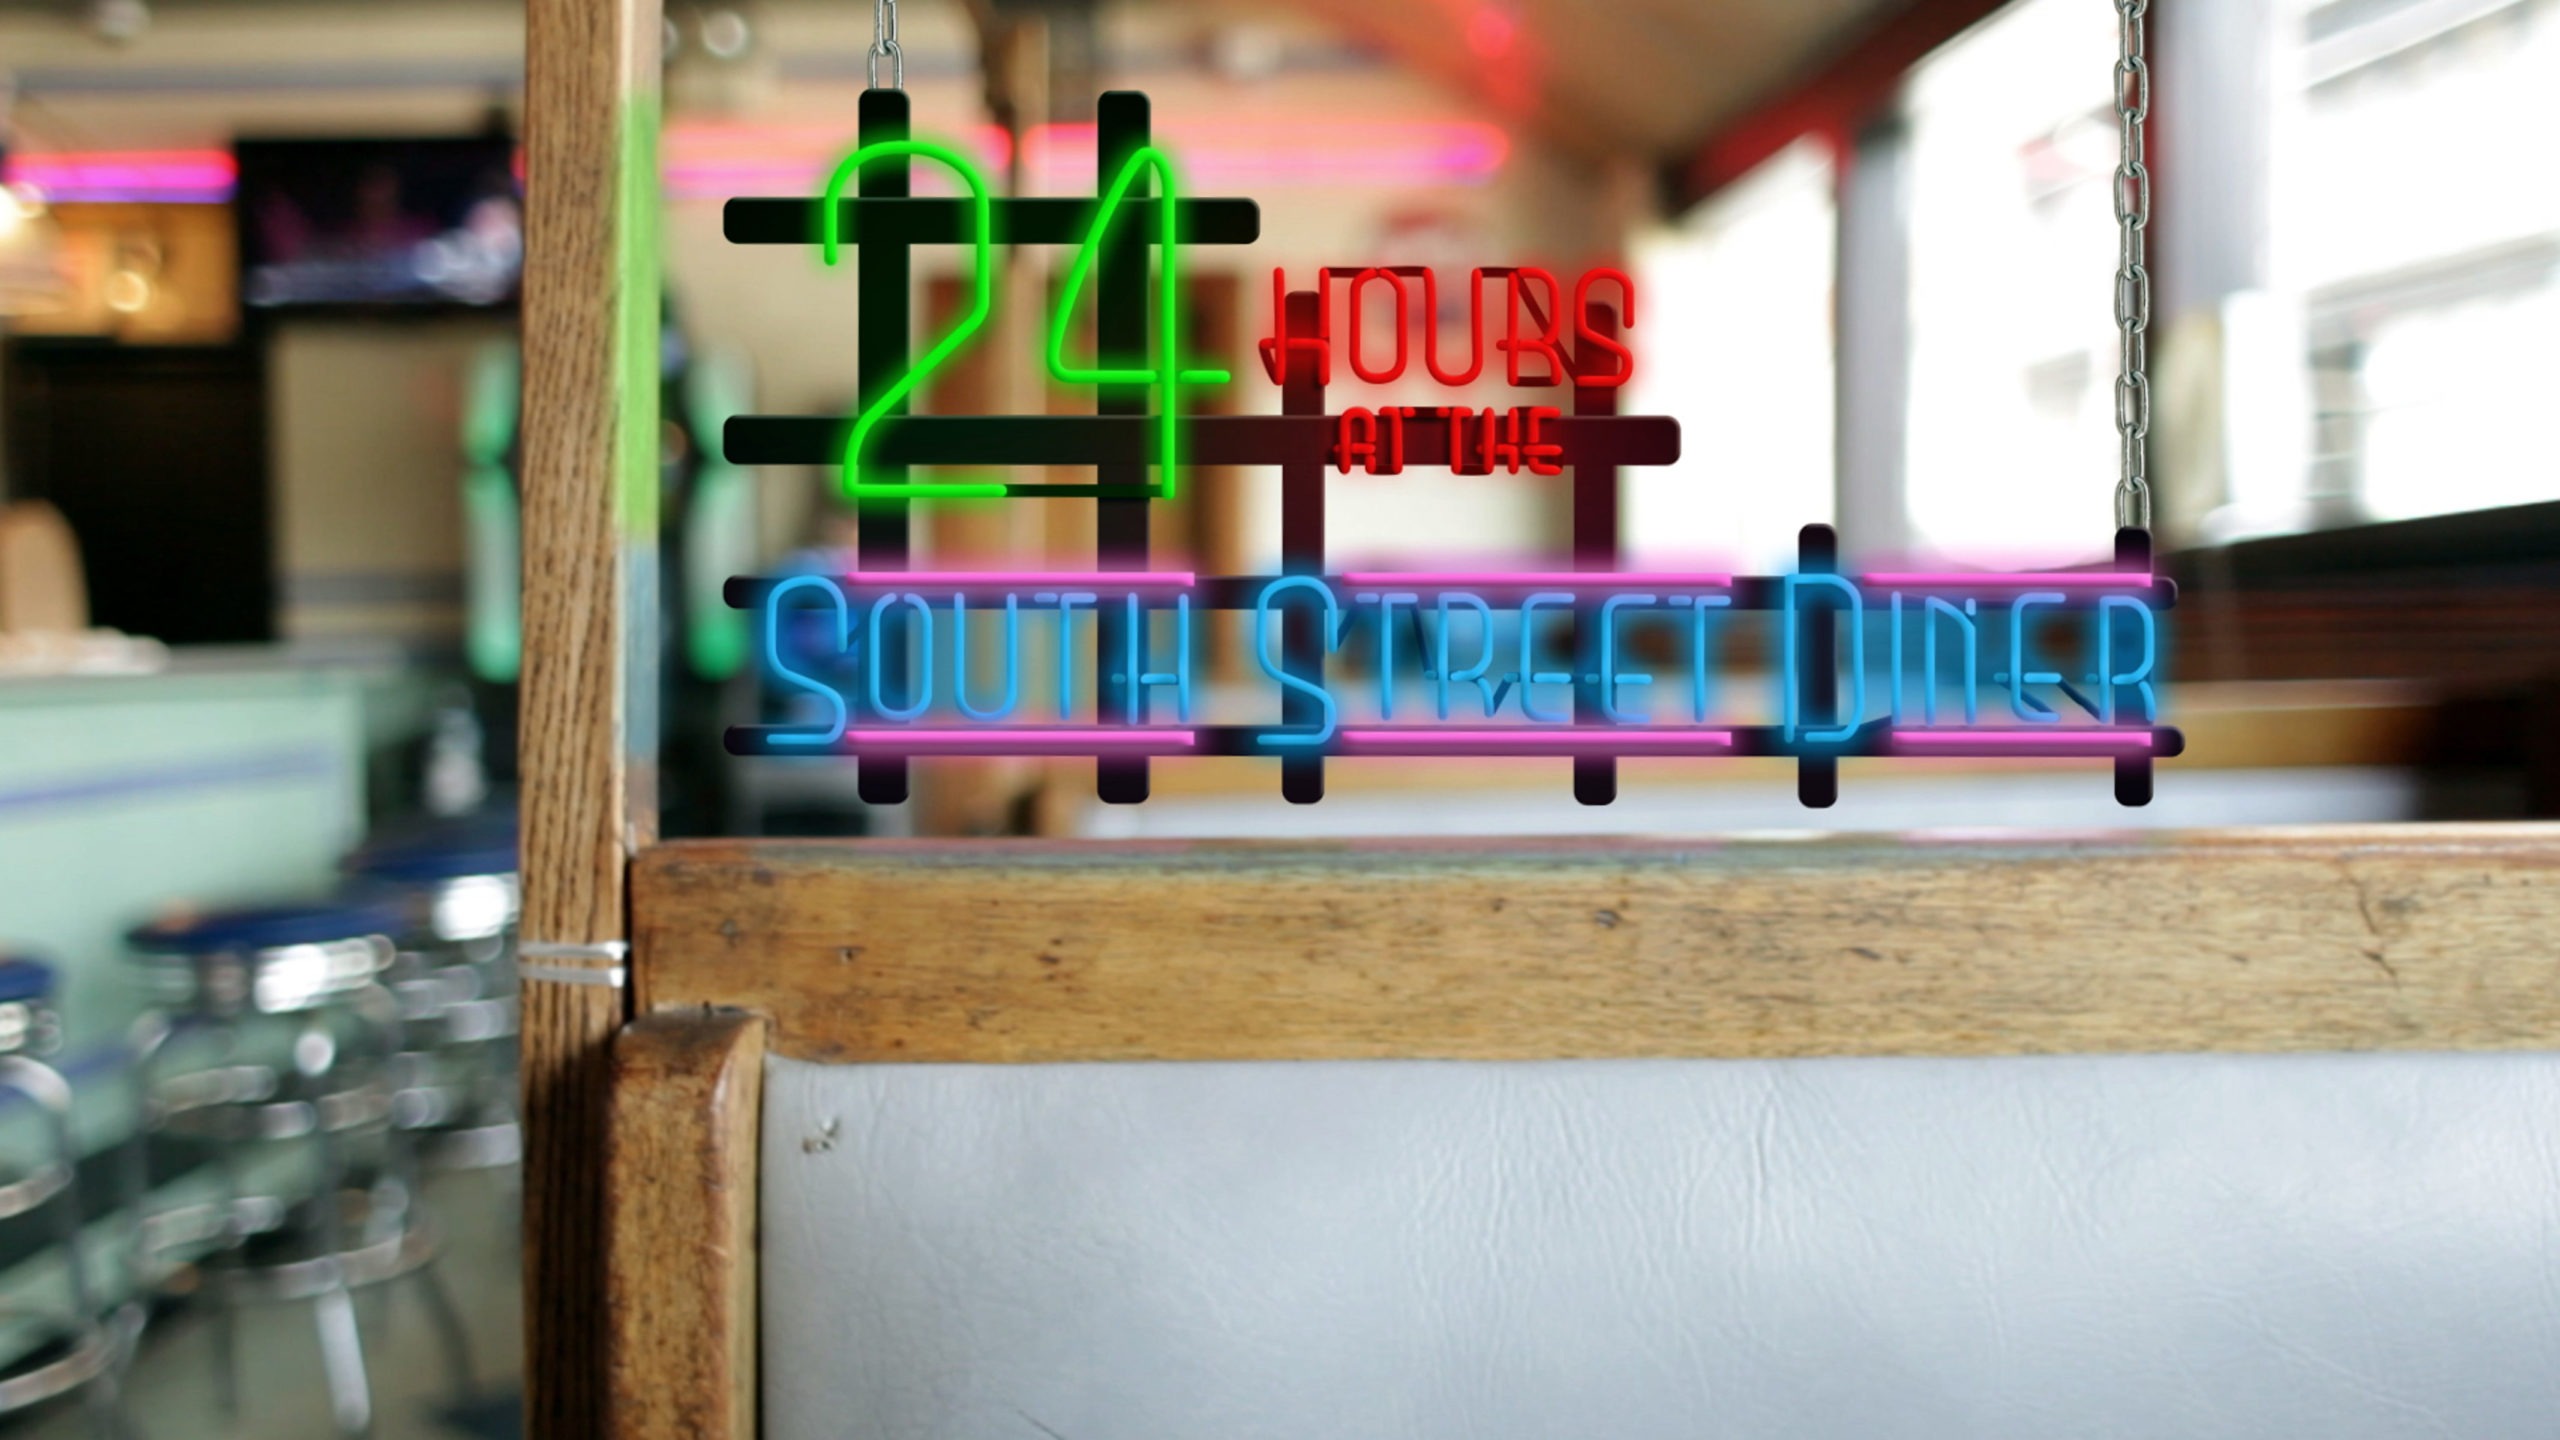 24 Hours at the South Street Diner